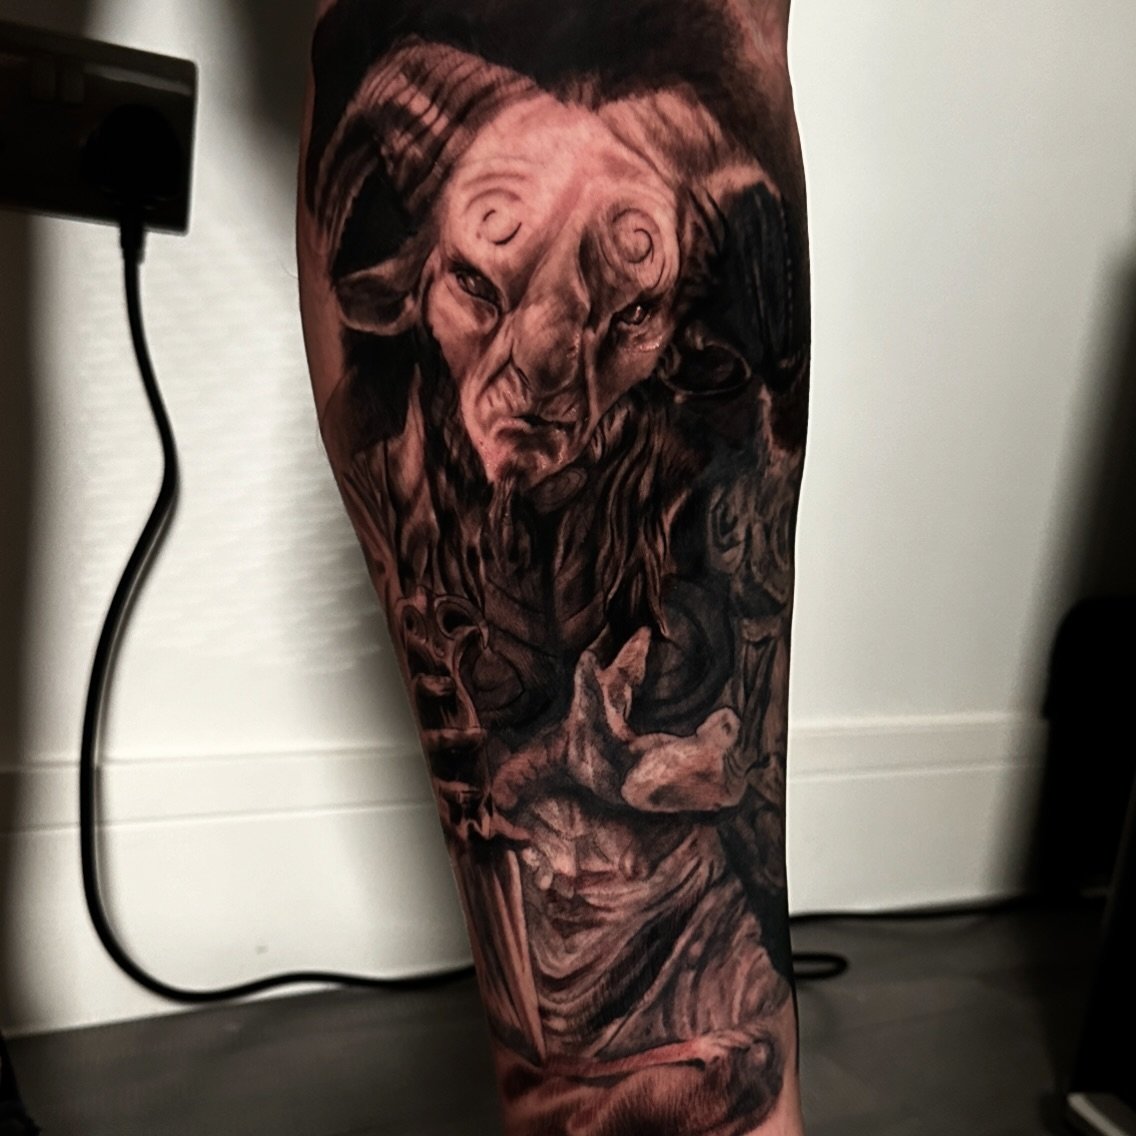 New addition to pans labyrinth leg sleeve&hellip;.
Ofelias inner strength &ldquo;The Fawn&rdquo;

Thanks to Ben. He trusted me in tattooing one of his favourite movies. Ben is a big horror movie buff. And only picks the best 😊

I love the dark side 